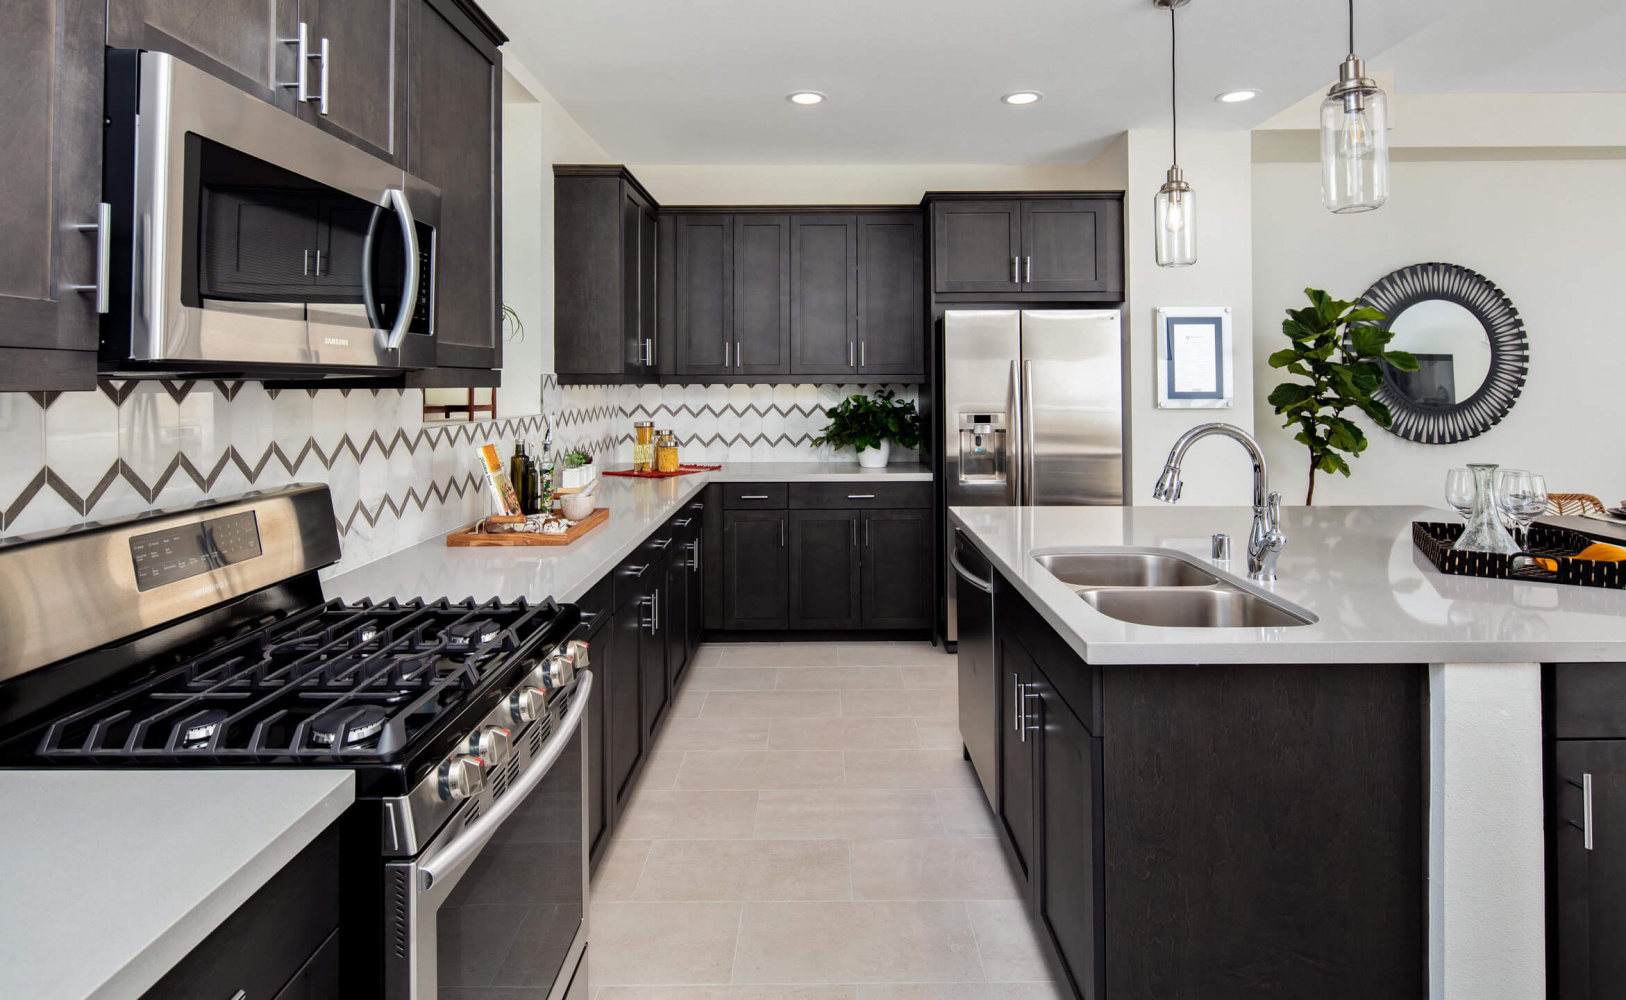 NewHeights-NewHomes-WestHills-Plan1-Kitchen2